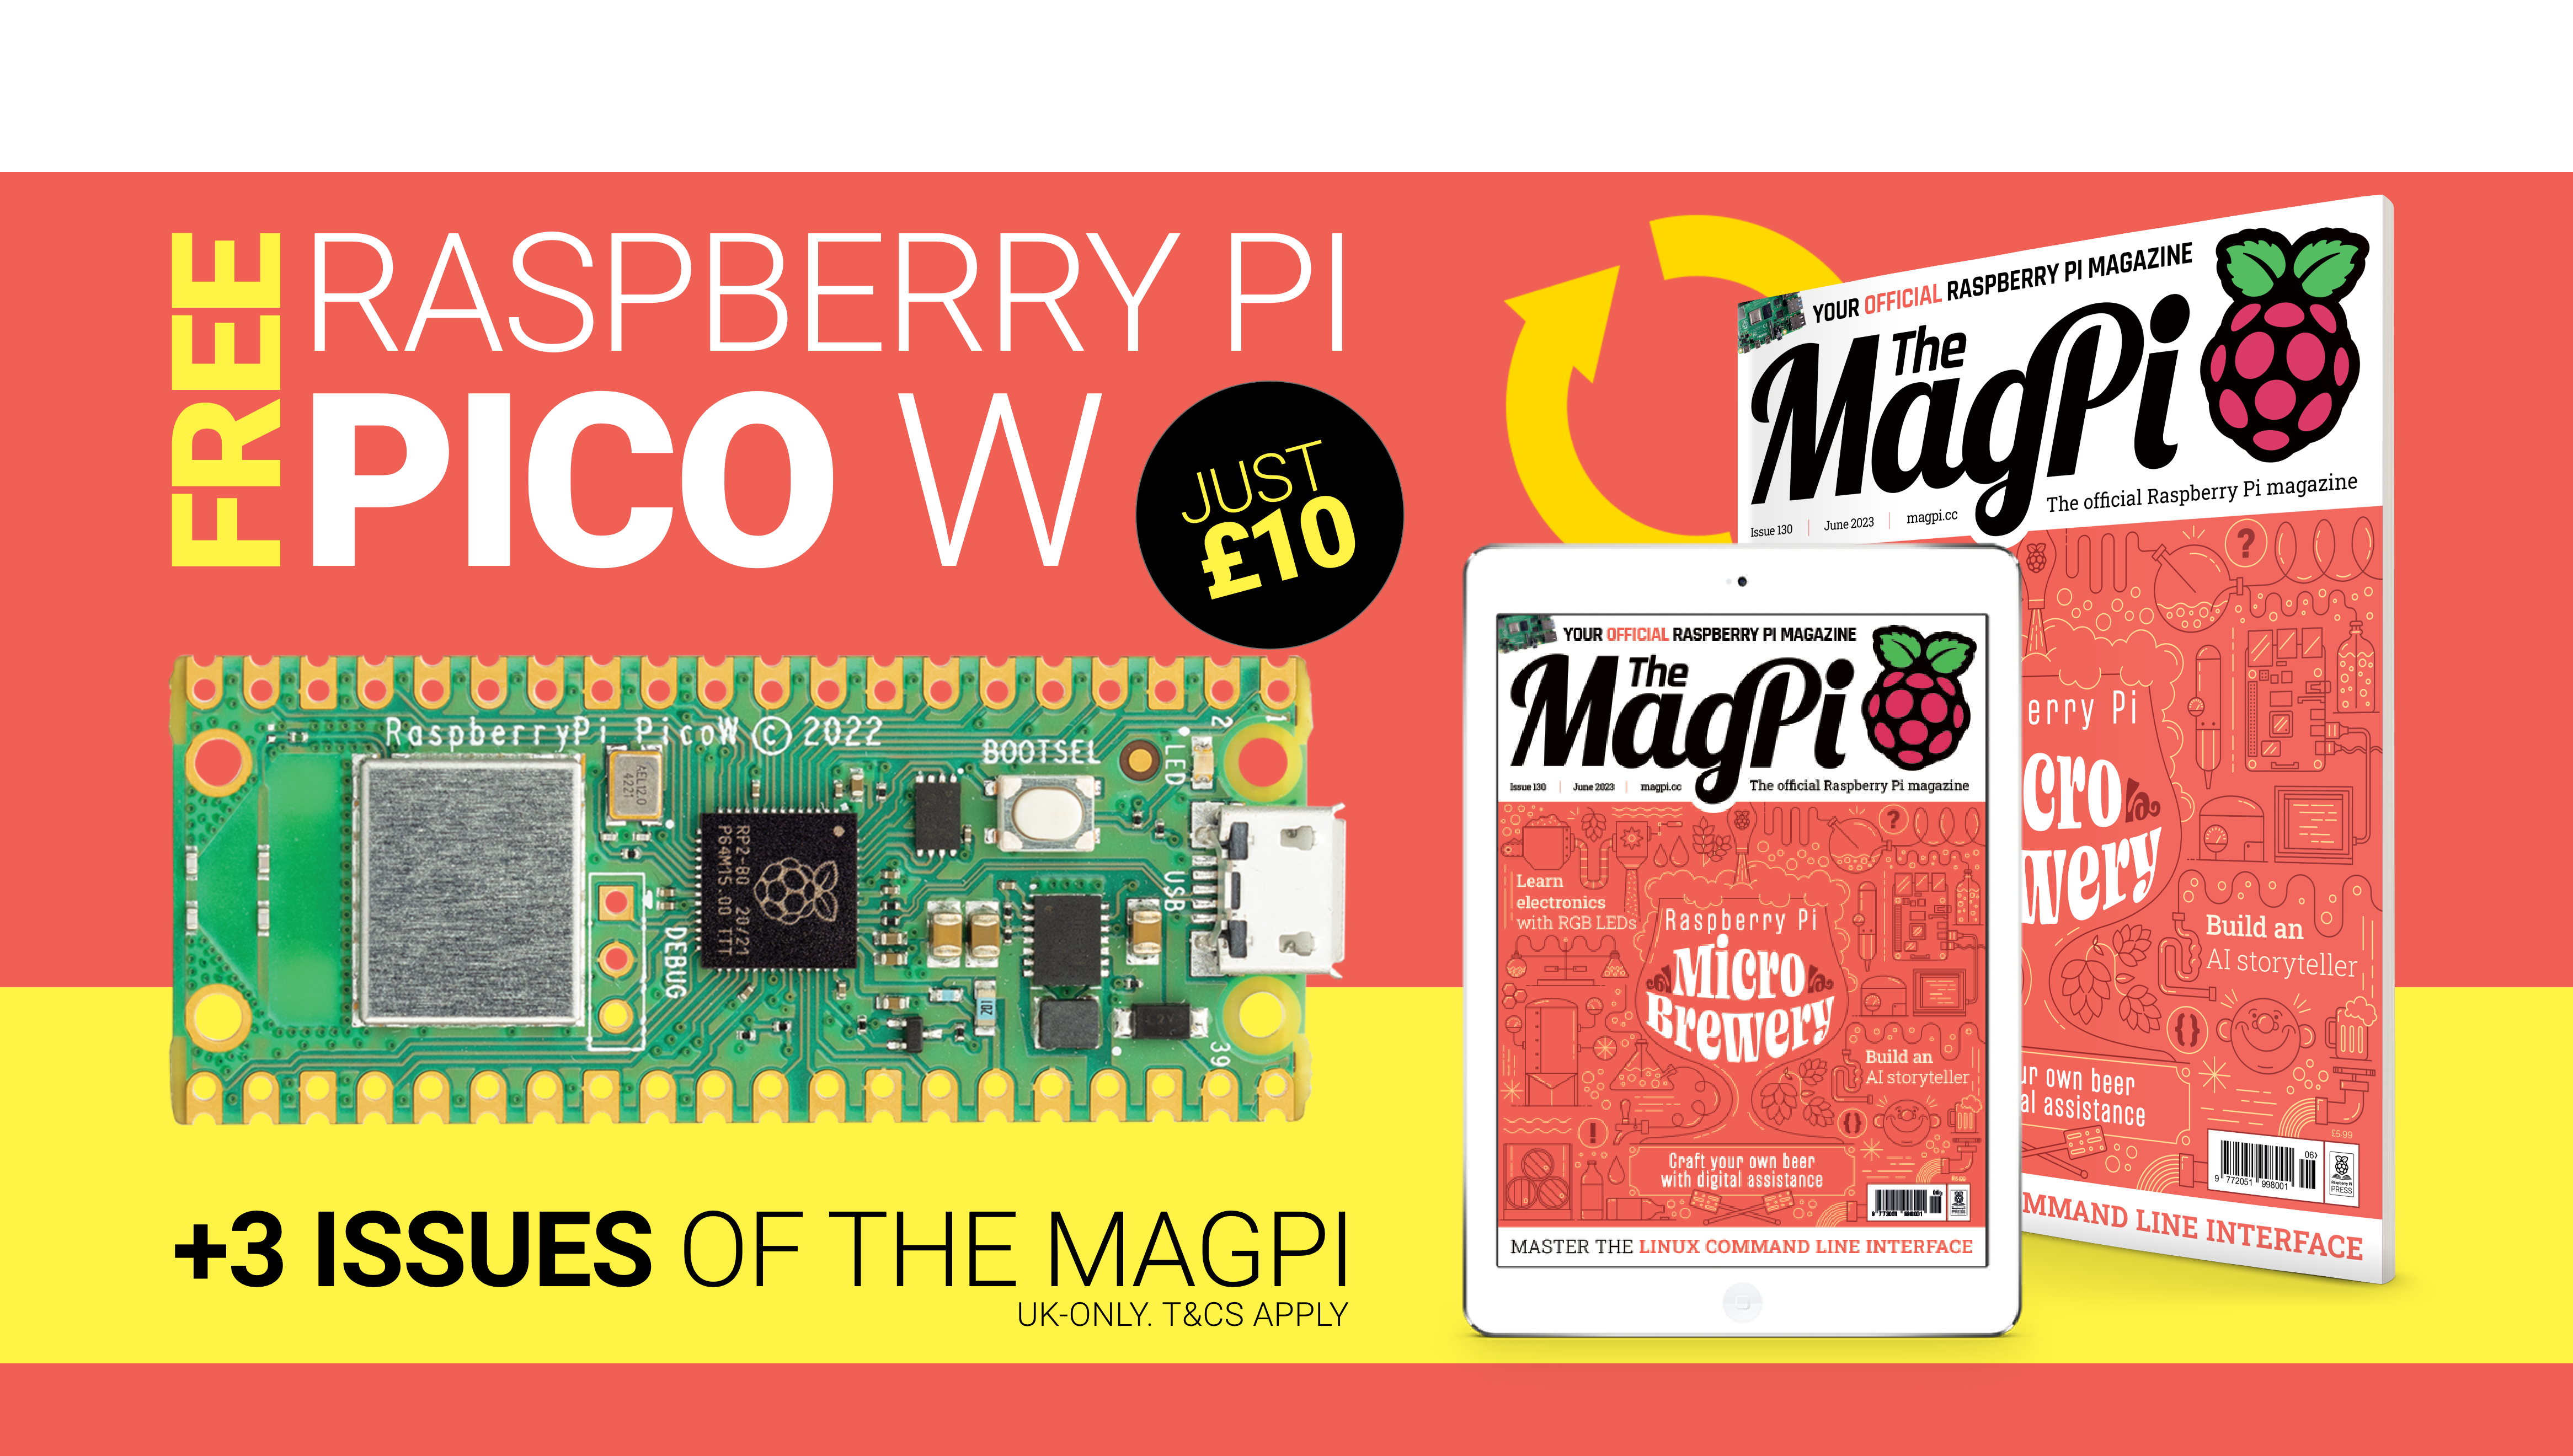 The MagPi issue 130 cover